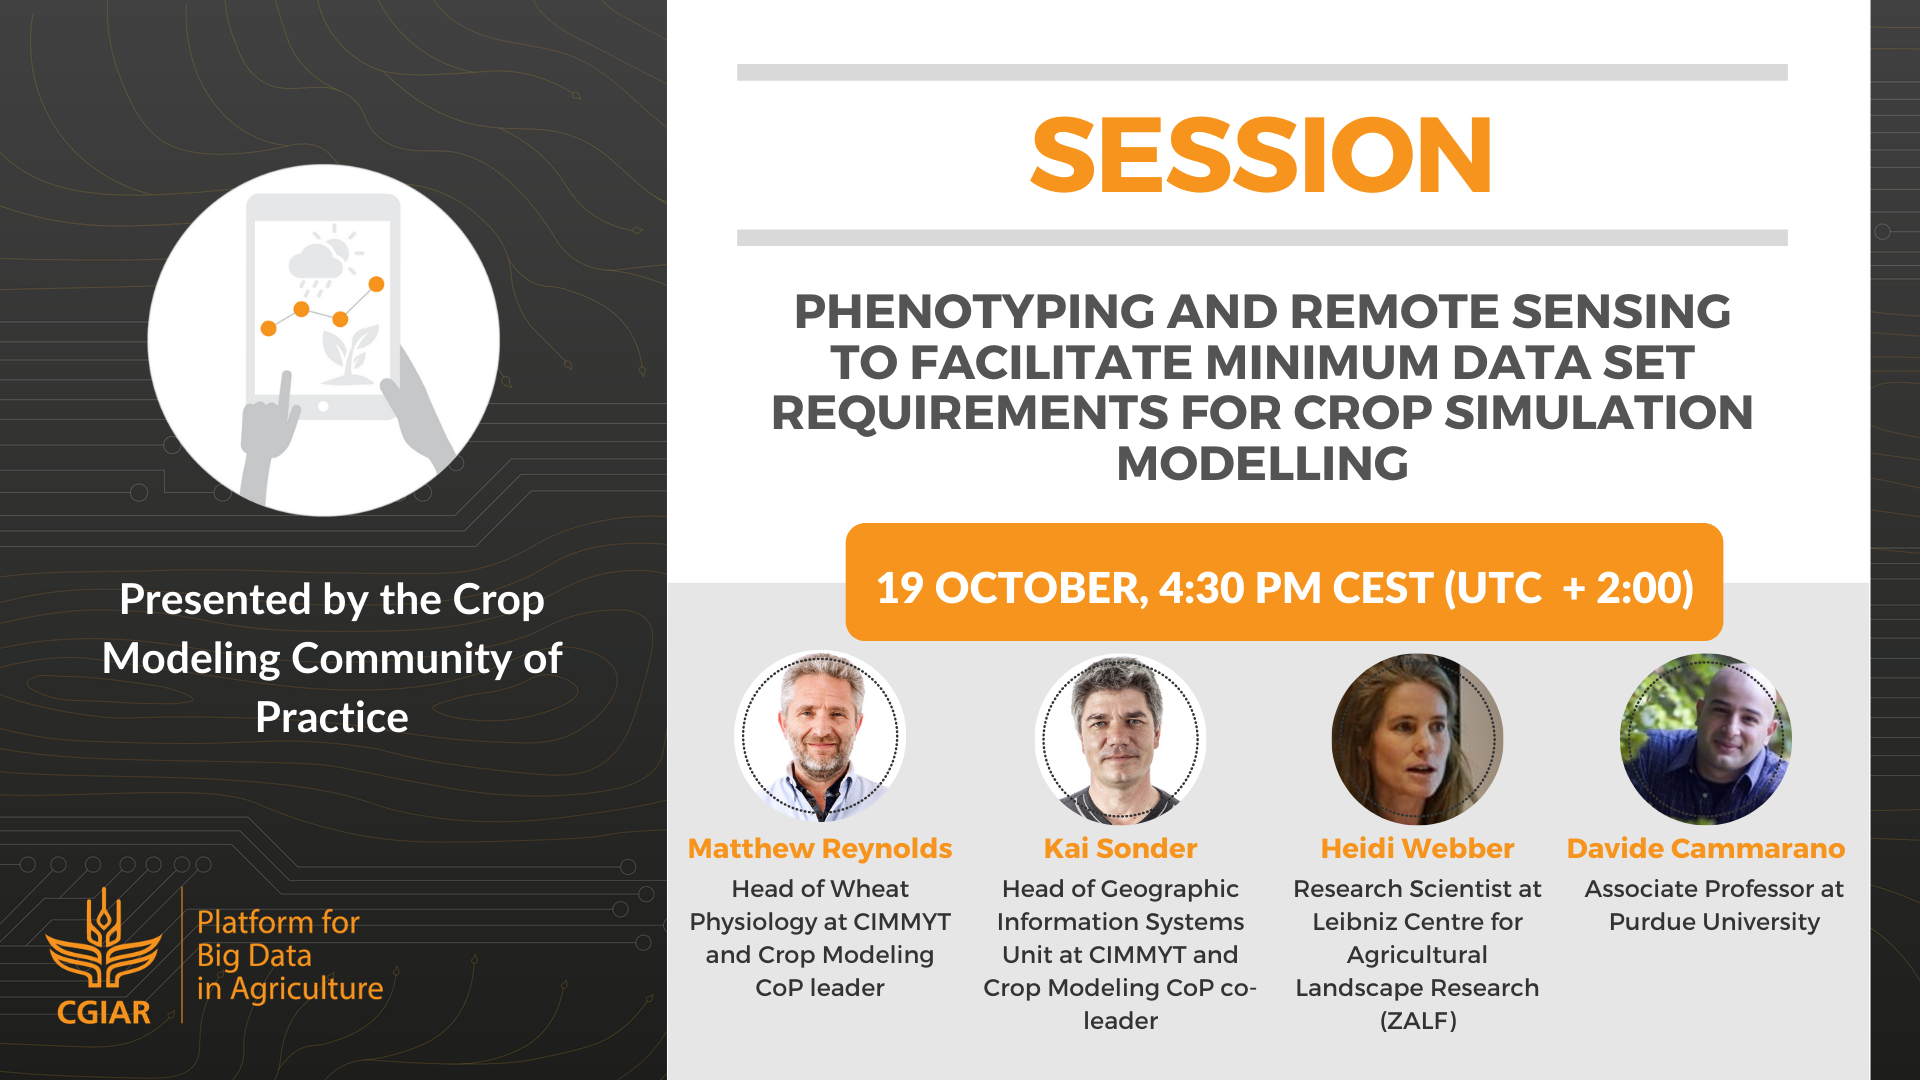 2020 Convention session - Phenotyping & Remote Sensing to Facilitate Minimum Data Set Requirements for Crop Simulation Modeling